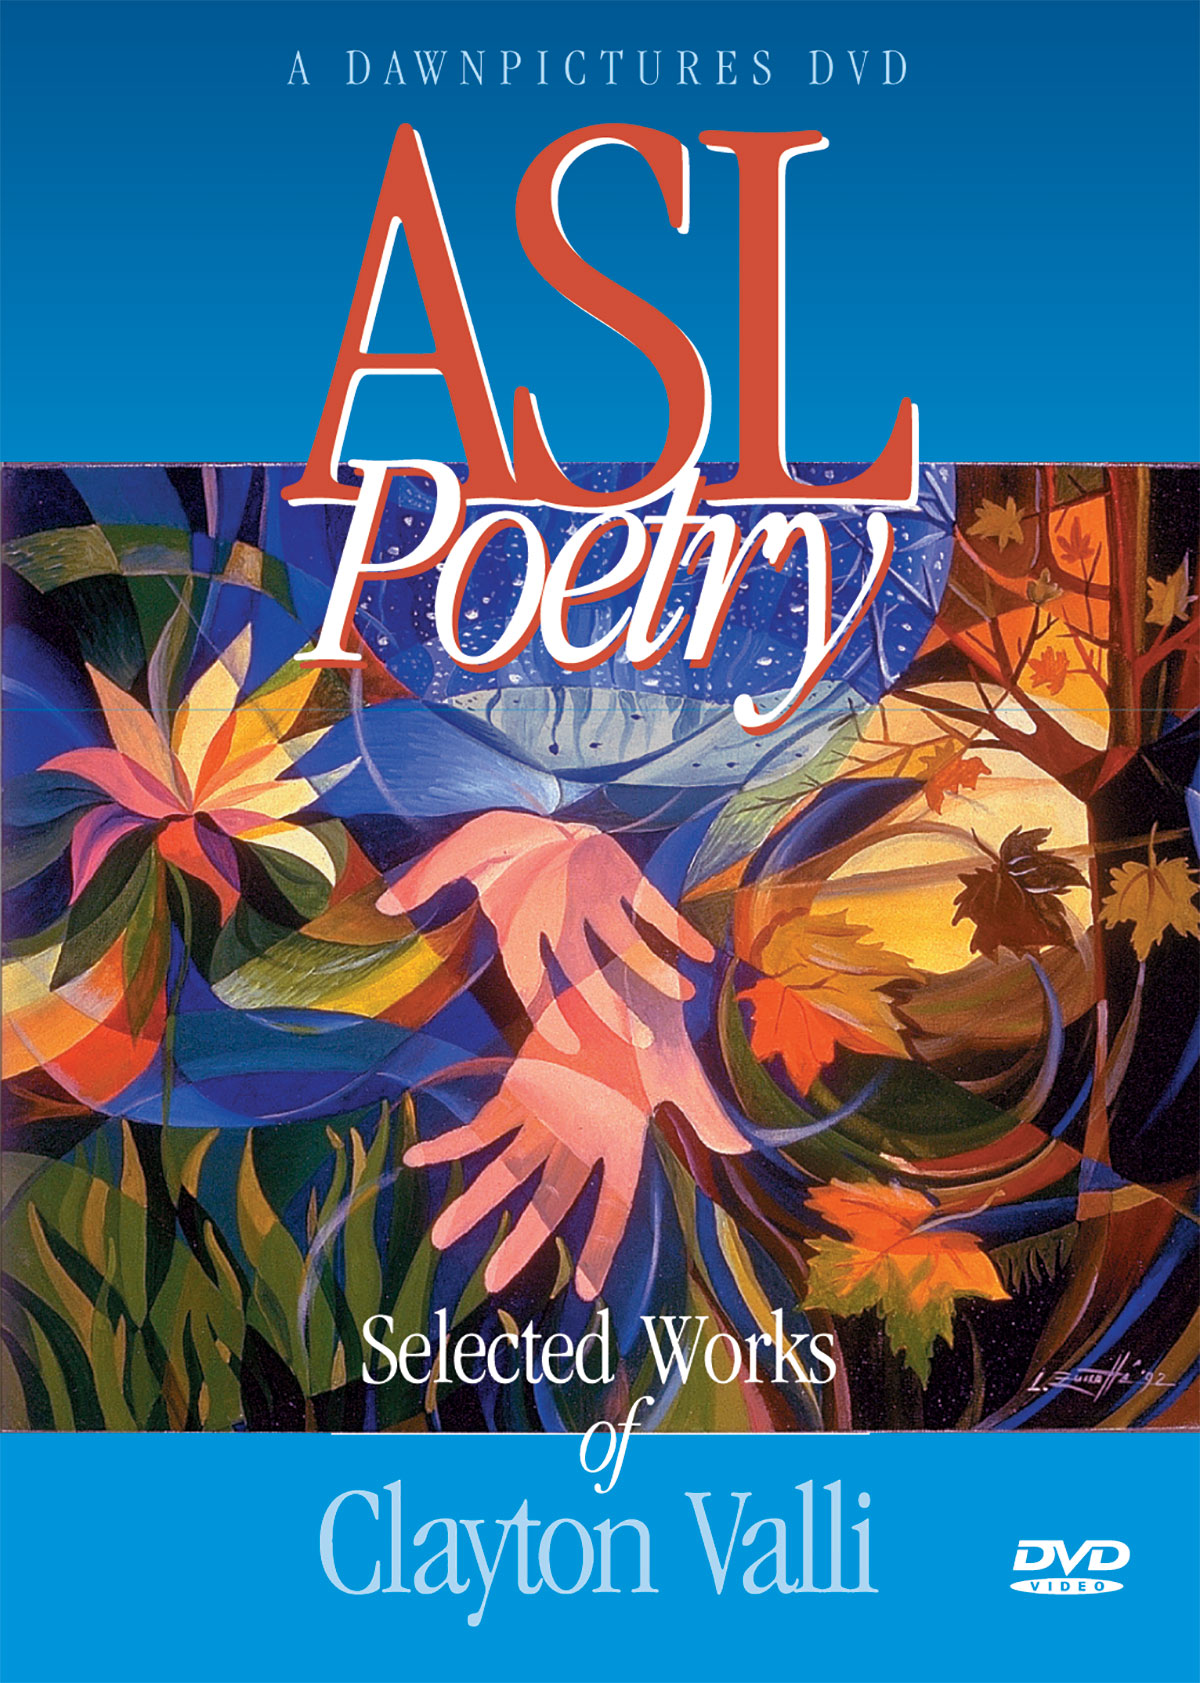 cover image for the resource "ASL Poetry: Selected Works of Clayton Valli" DVD